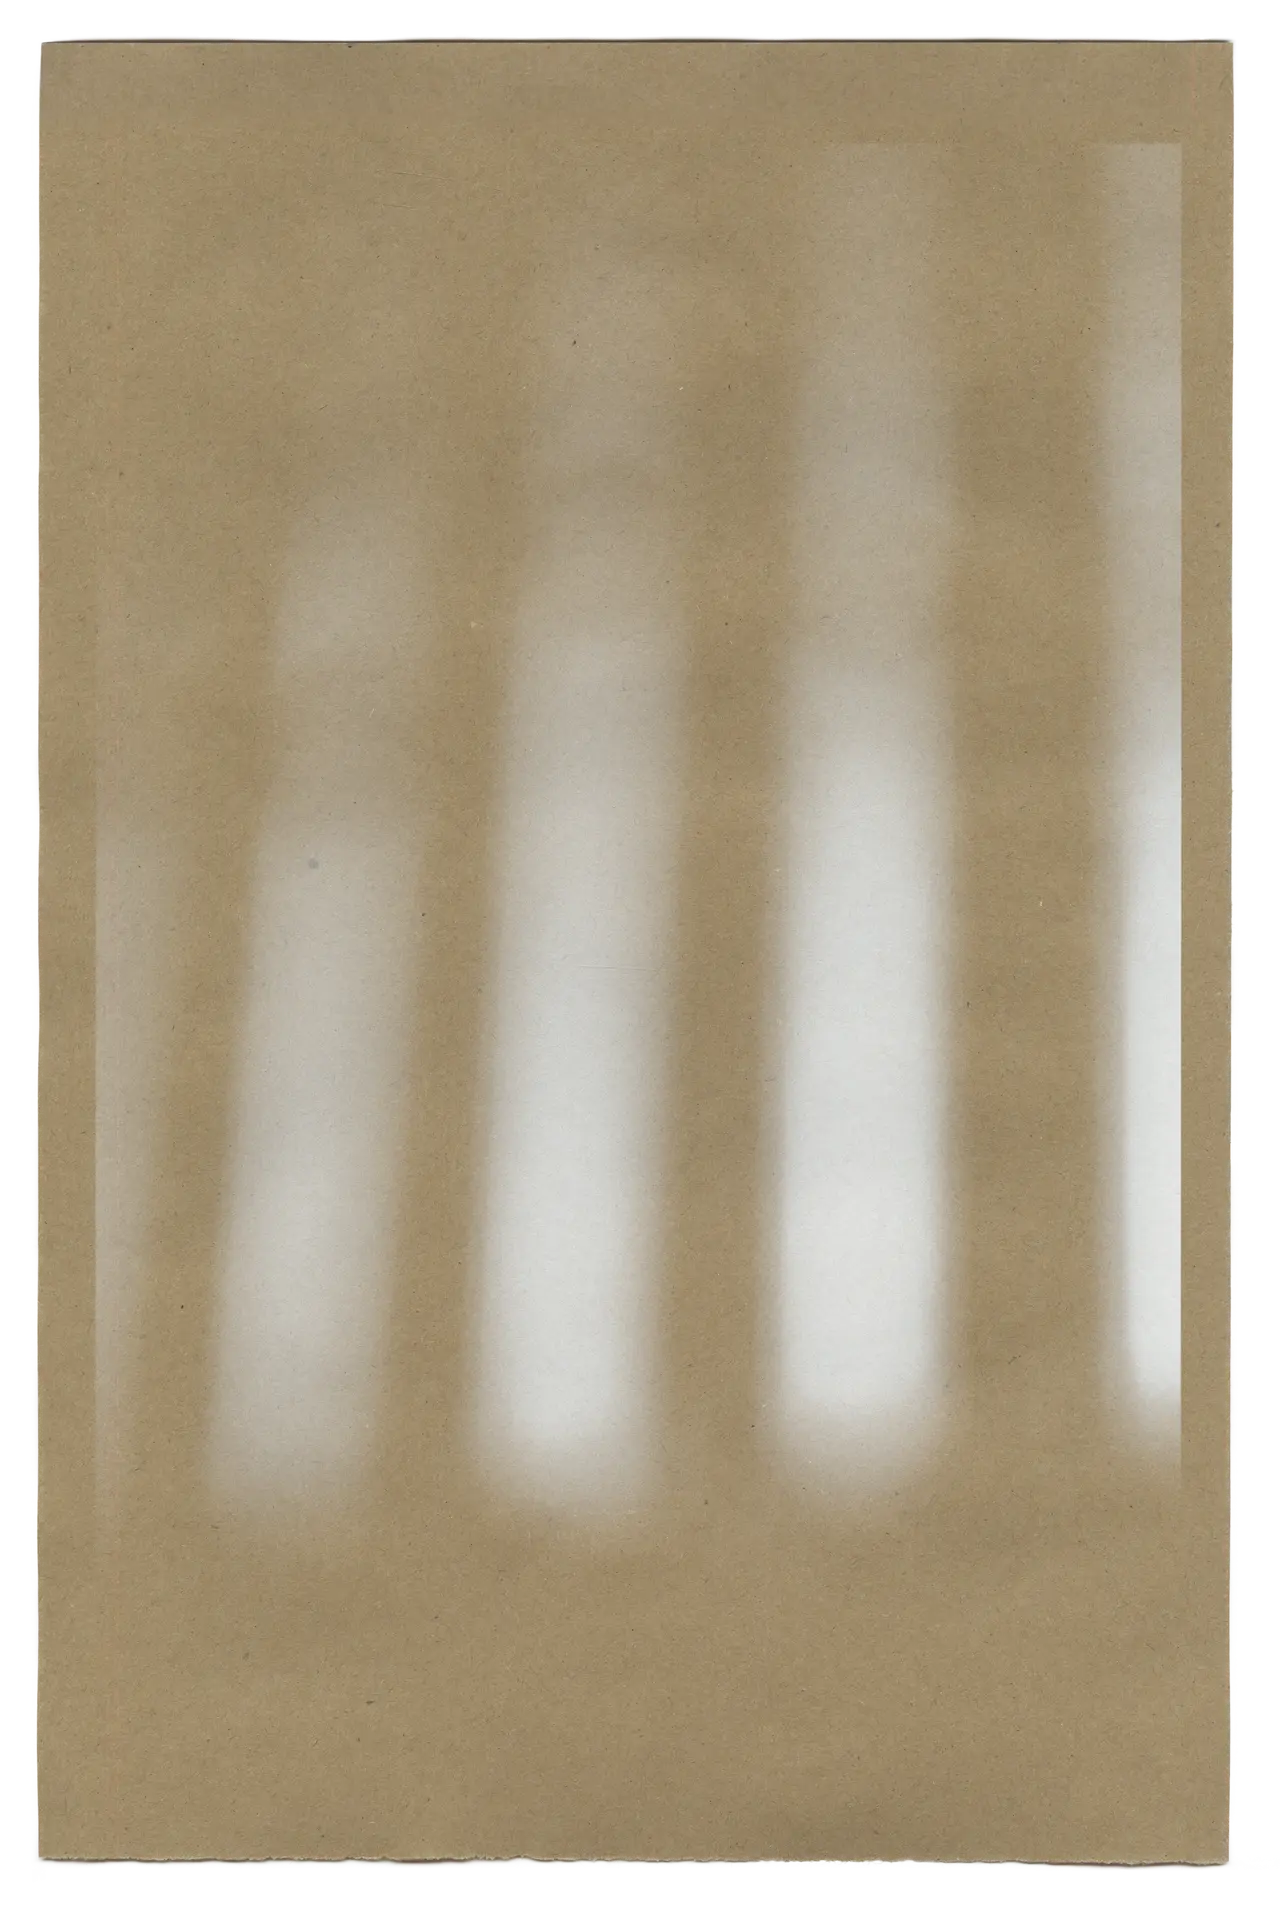 This print consists of several vertical lines, these were formed by the ridges along the facade of the new Brown’s Performing Arts Center building lit from below at night.